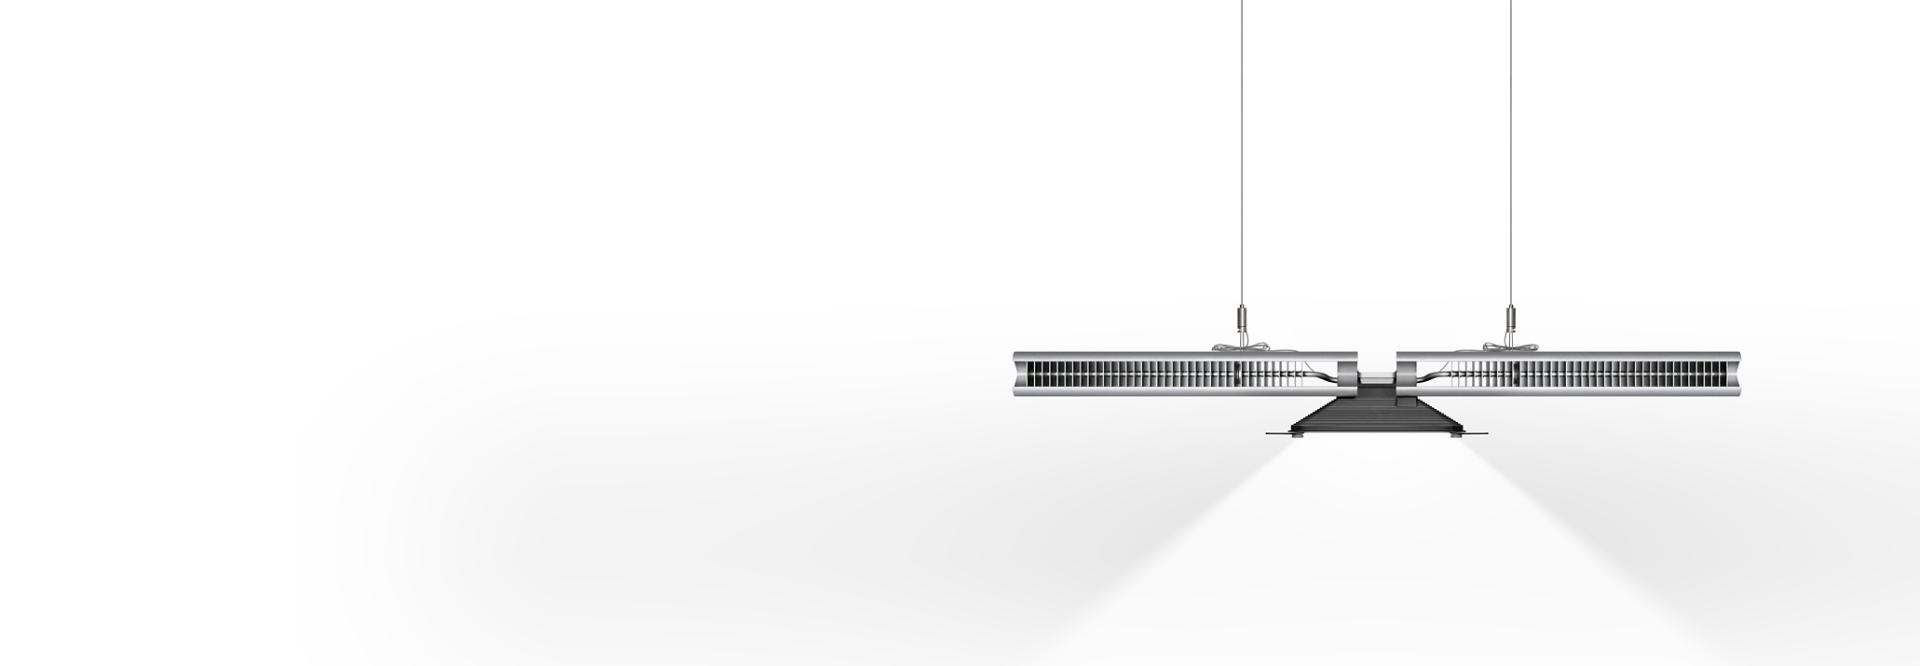 Dyson Cu-Beam Down suspended light